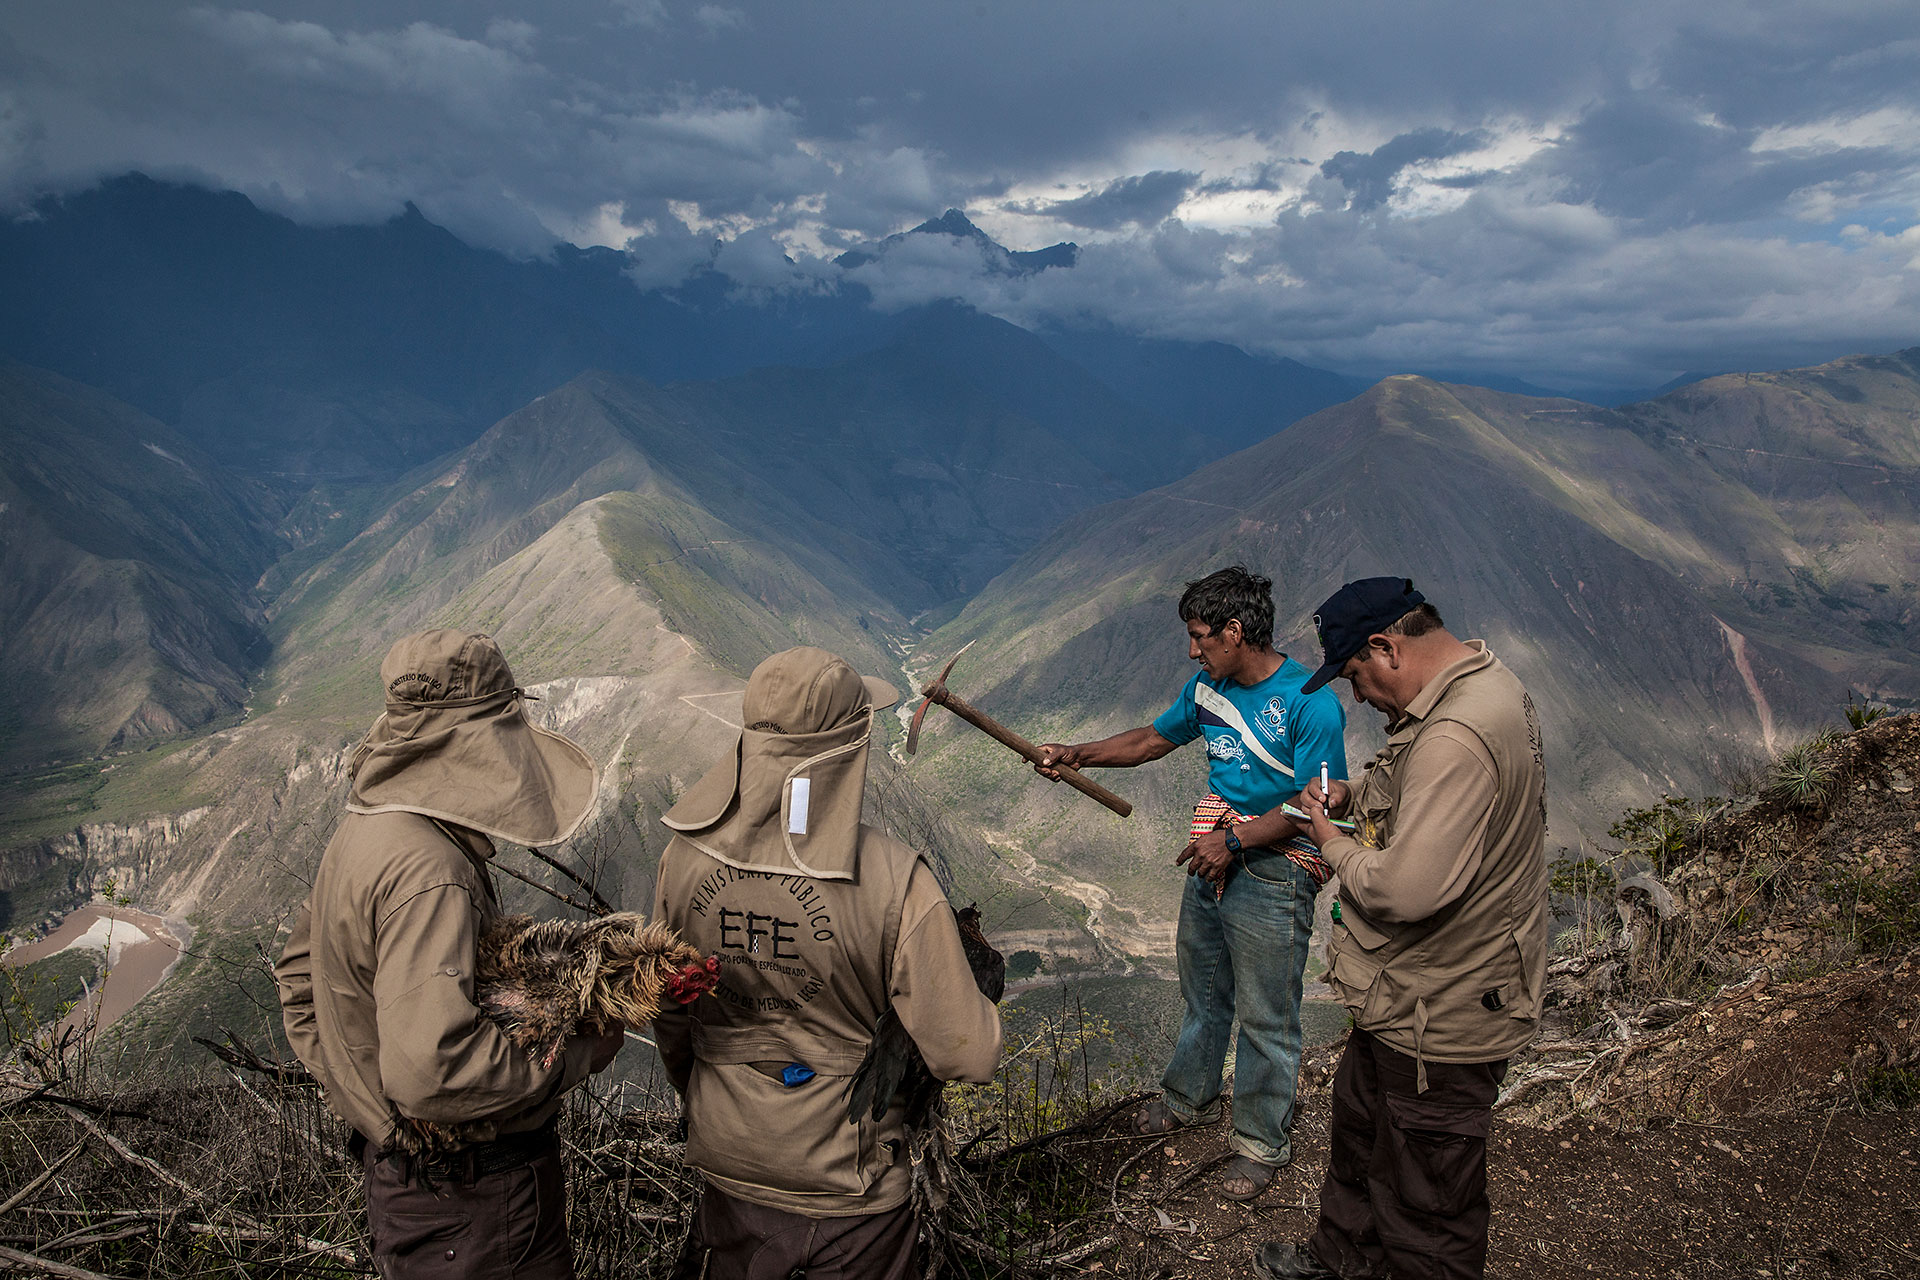 Félix Pacheco (36 years old), equipped with his pickaxe, points out to the Forensic Team of Specialists the location of the grave which he thinks contains the remains of his father, murdered 30 years before. Félix escaped with his mother from a military attack in the mountains where they had been hiding.